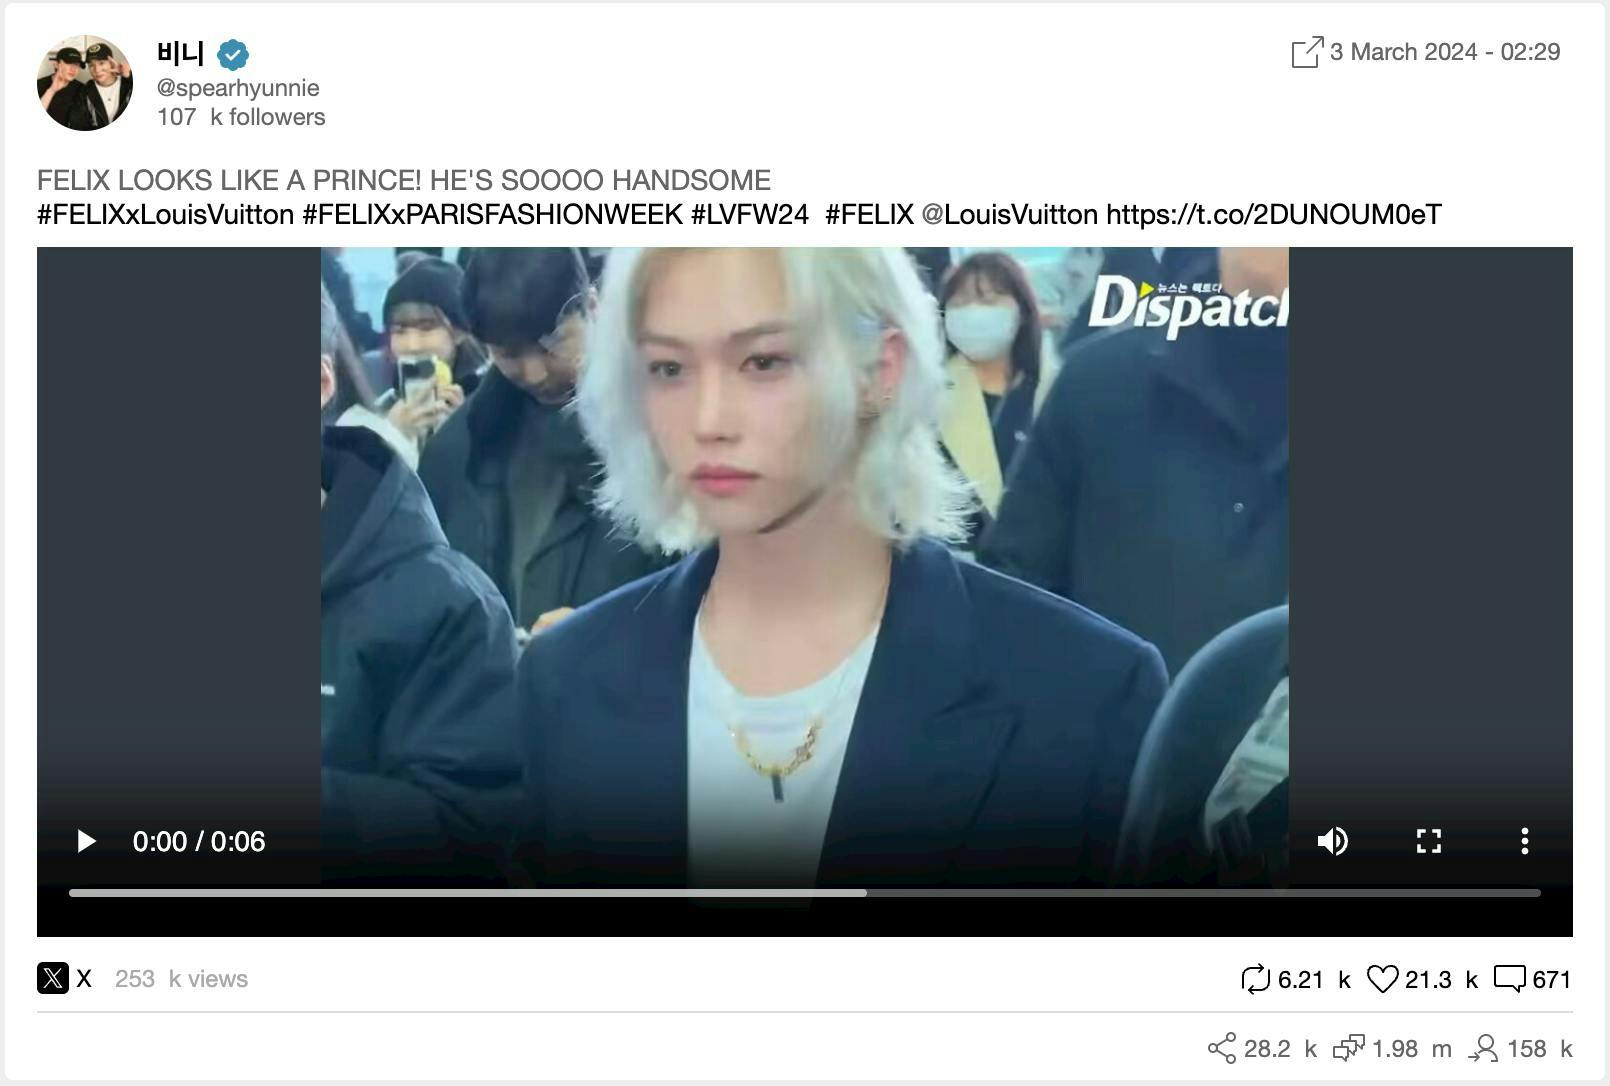 An X post featuring a video of Felix with the caption "Felix looks like a prince! He's soooo handsome"